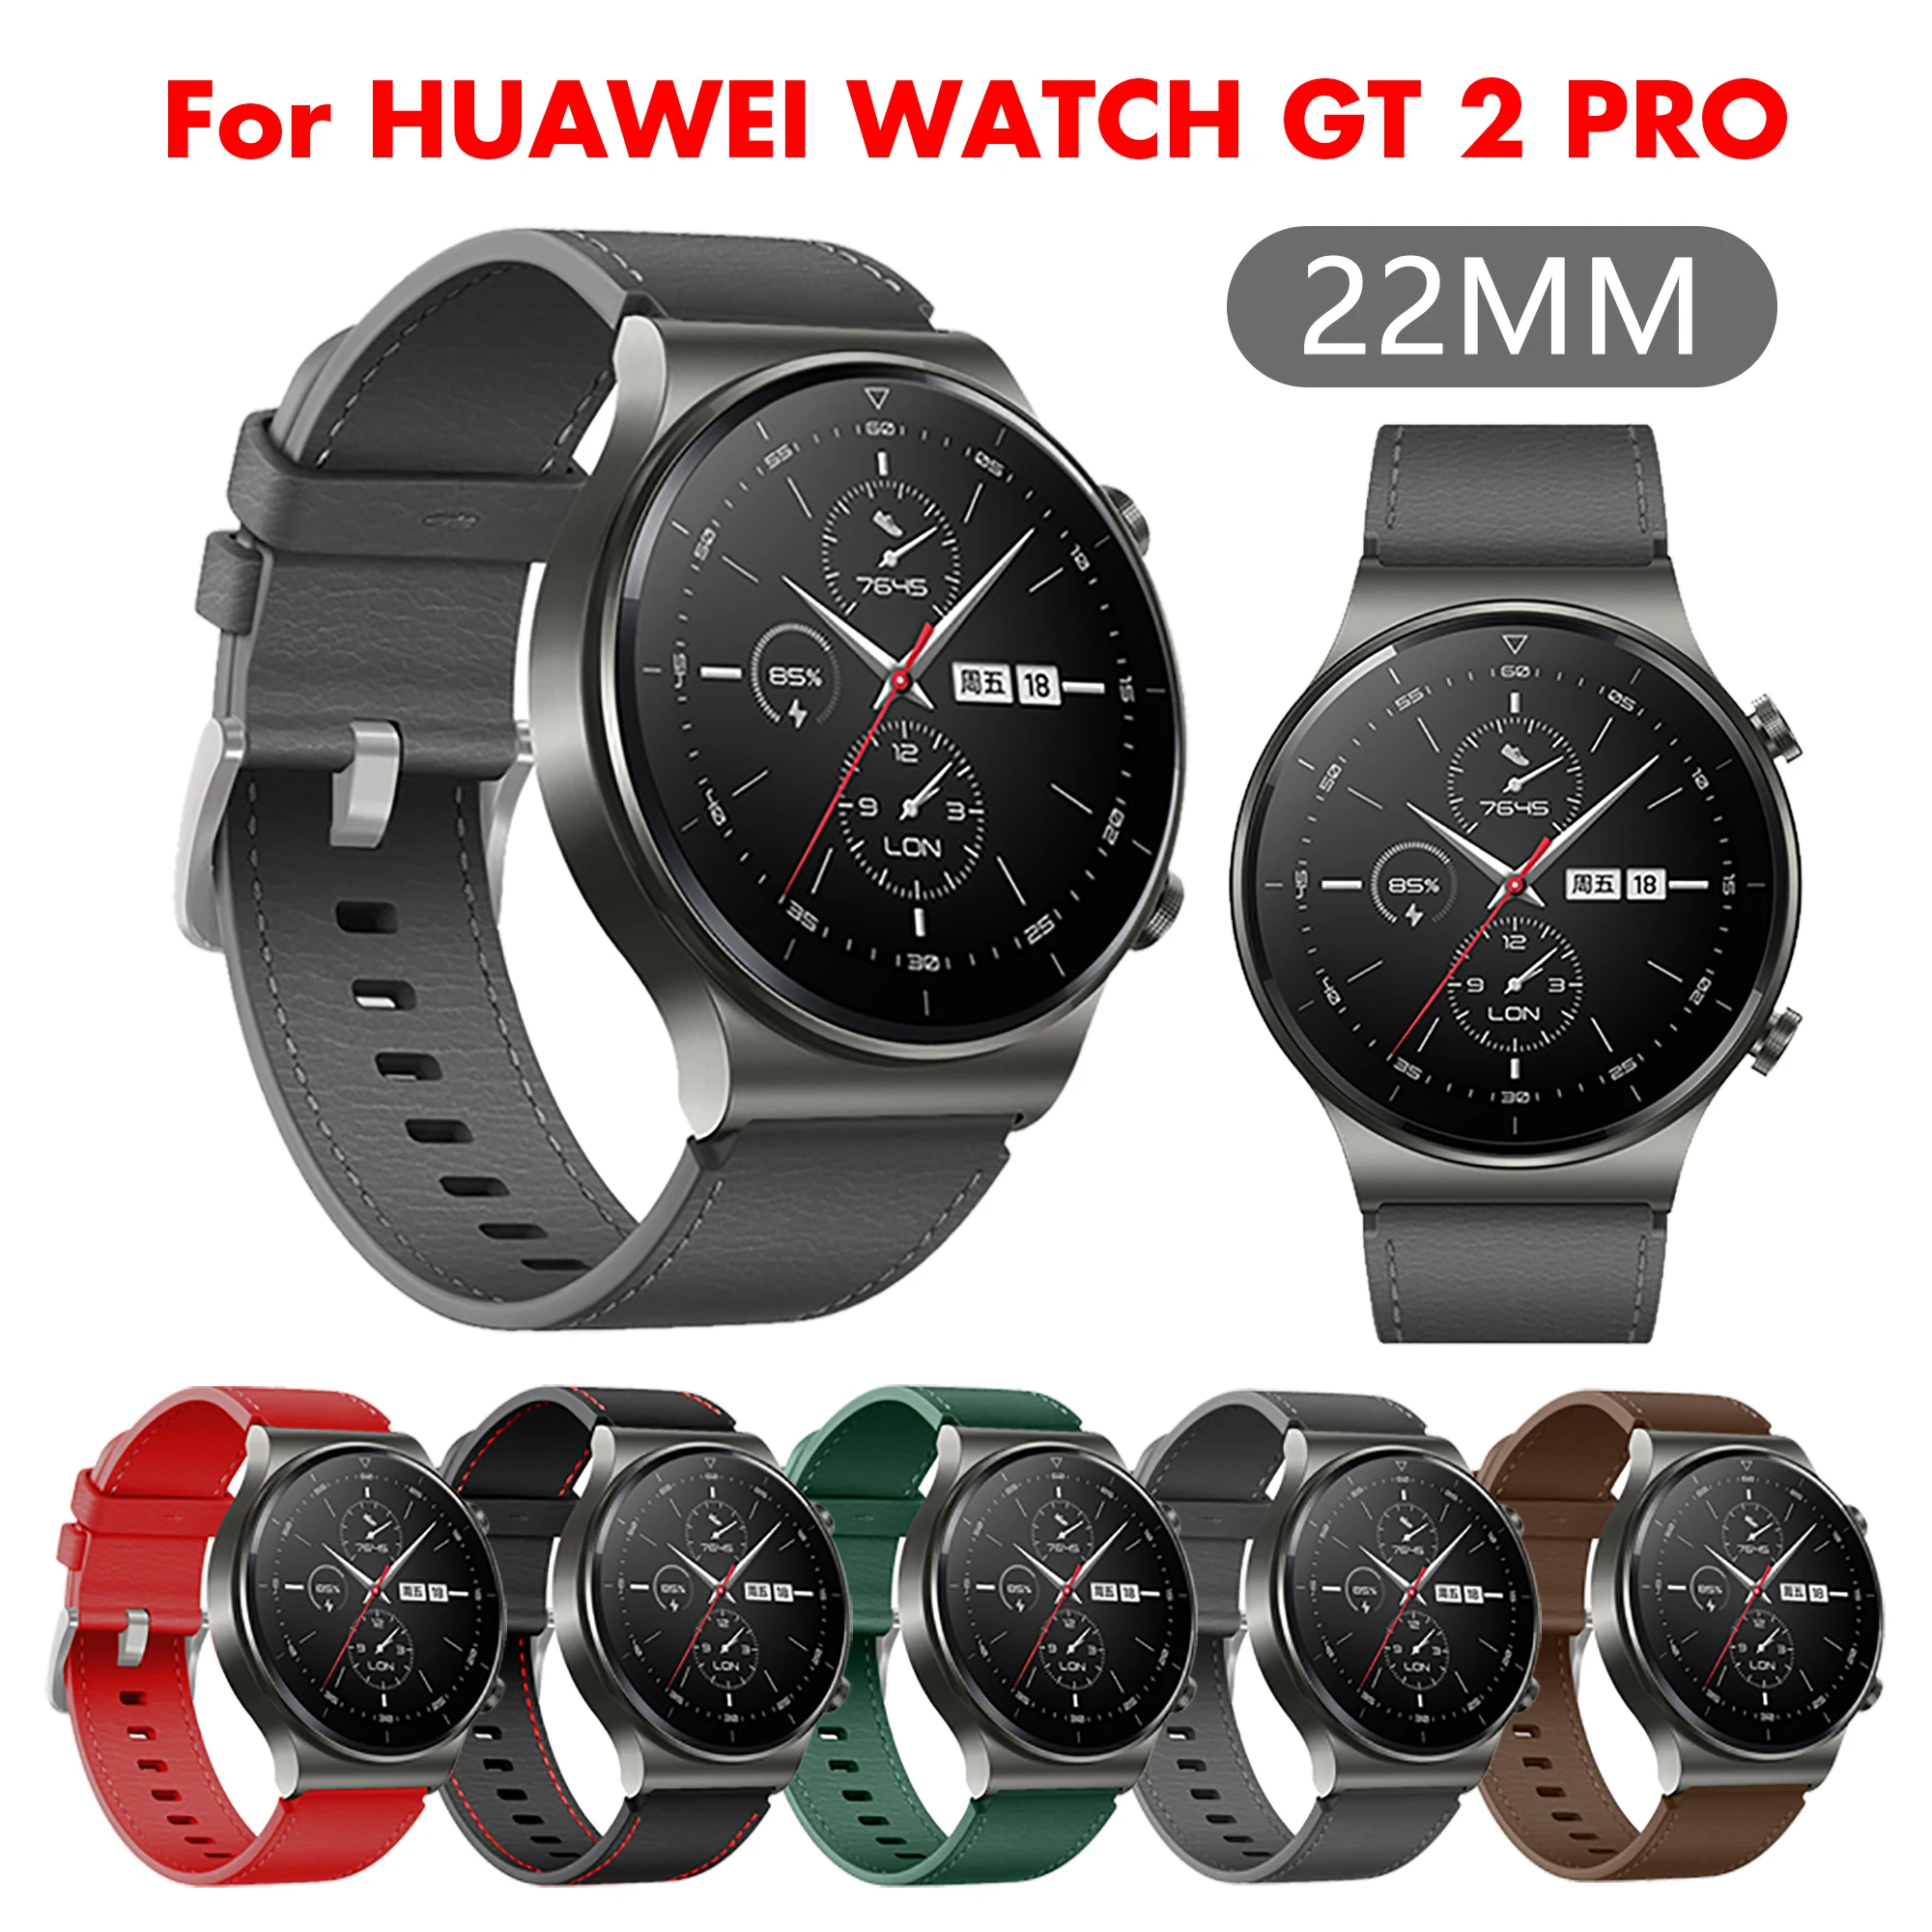 

22MM Leather Strap for HUAWEI Watch GT 2 Pro Wristband Watchband for Huawei gt2 Pro GT3 46MM Band Bracelet Replaceable correa